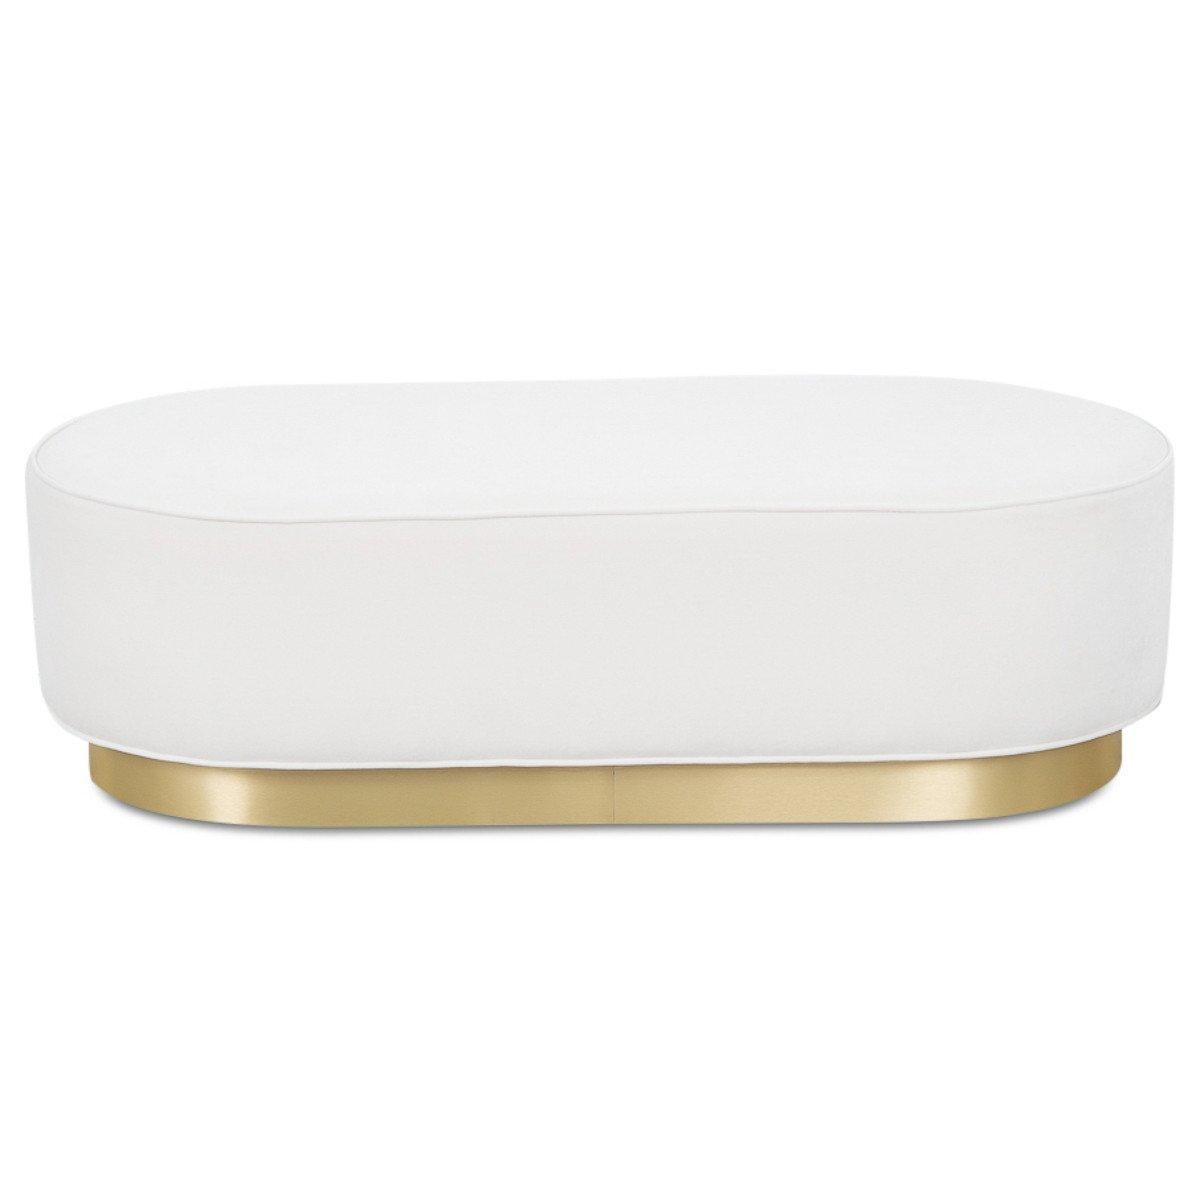 This pill shaped ottoman is the perfect addition to any living situation. Featuring a pill-like shape and a brass toekick, this piece can be used as an ottoman or as a bench. The possibilities are endless. Shown in snow velvet.

Dimensions:

54